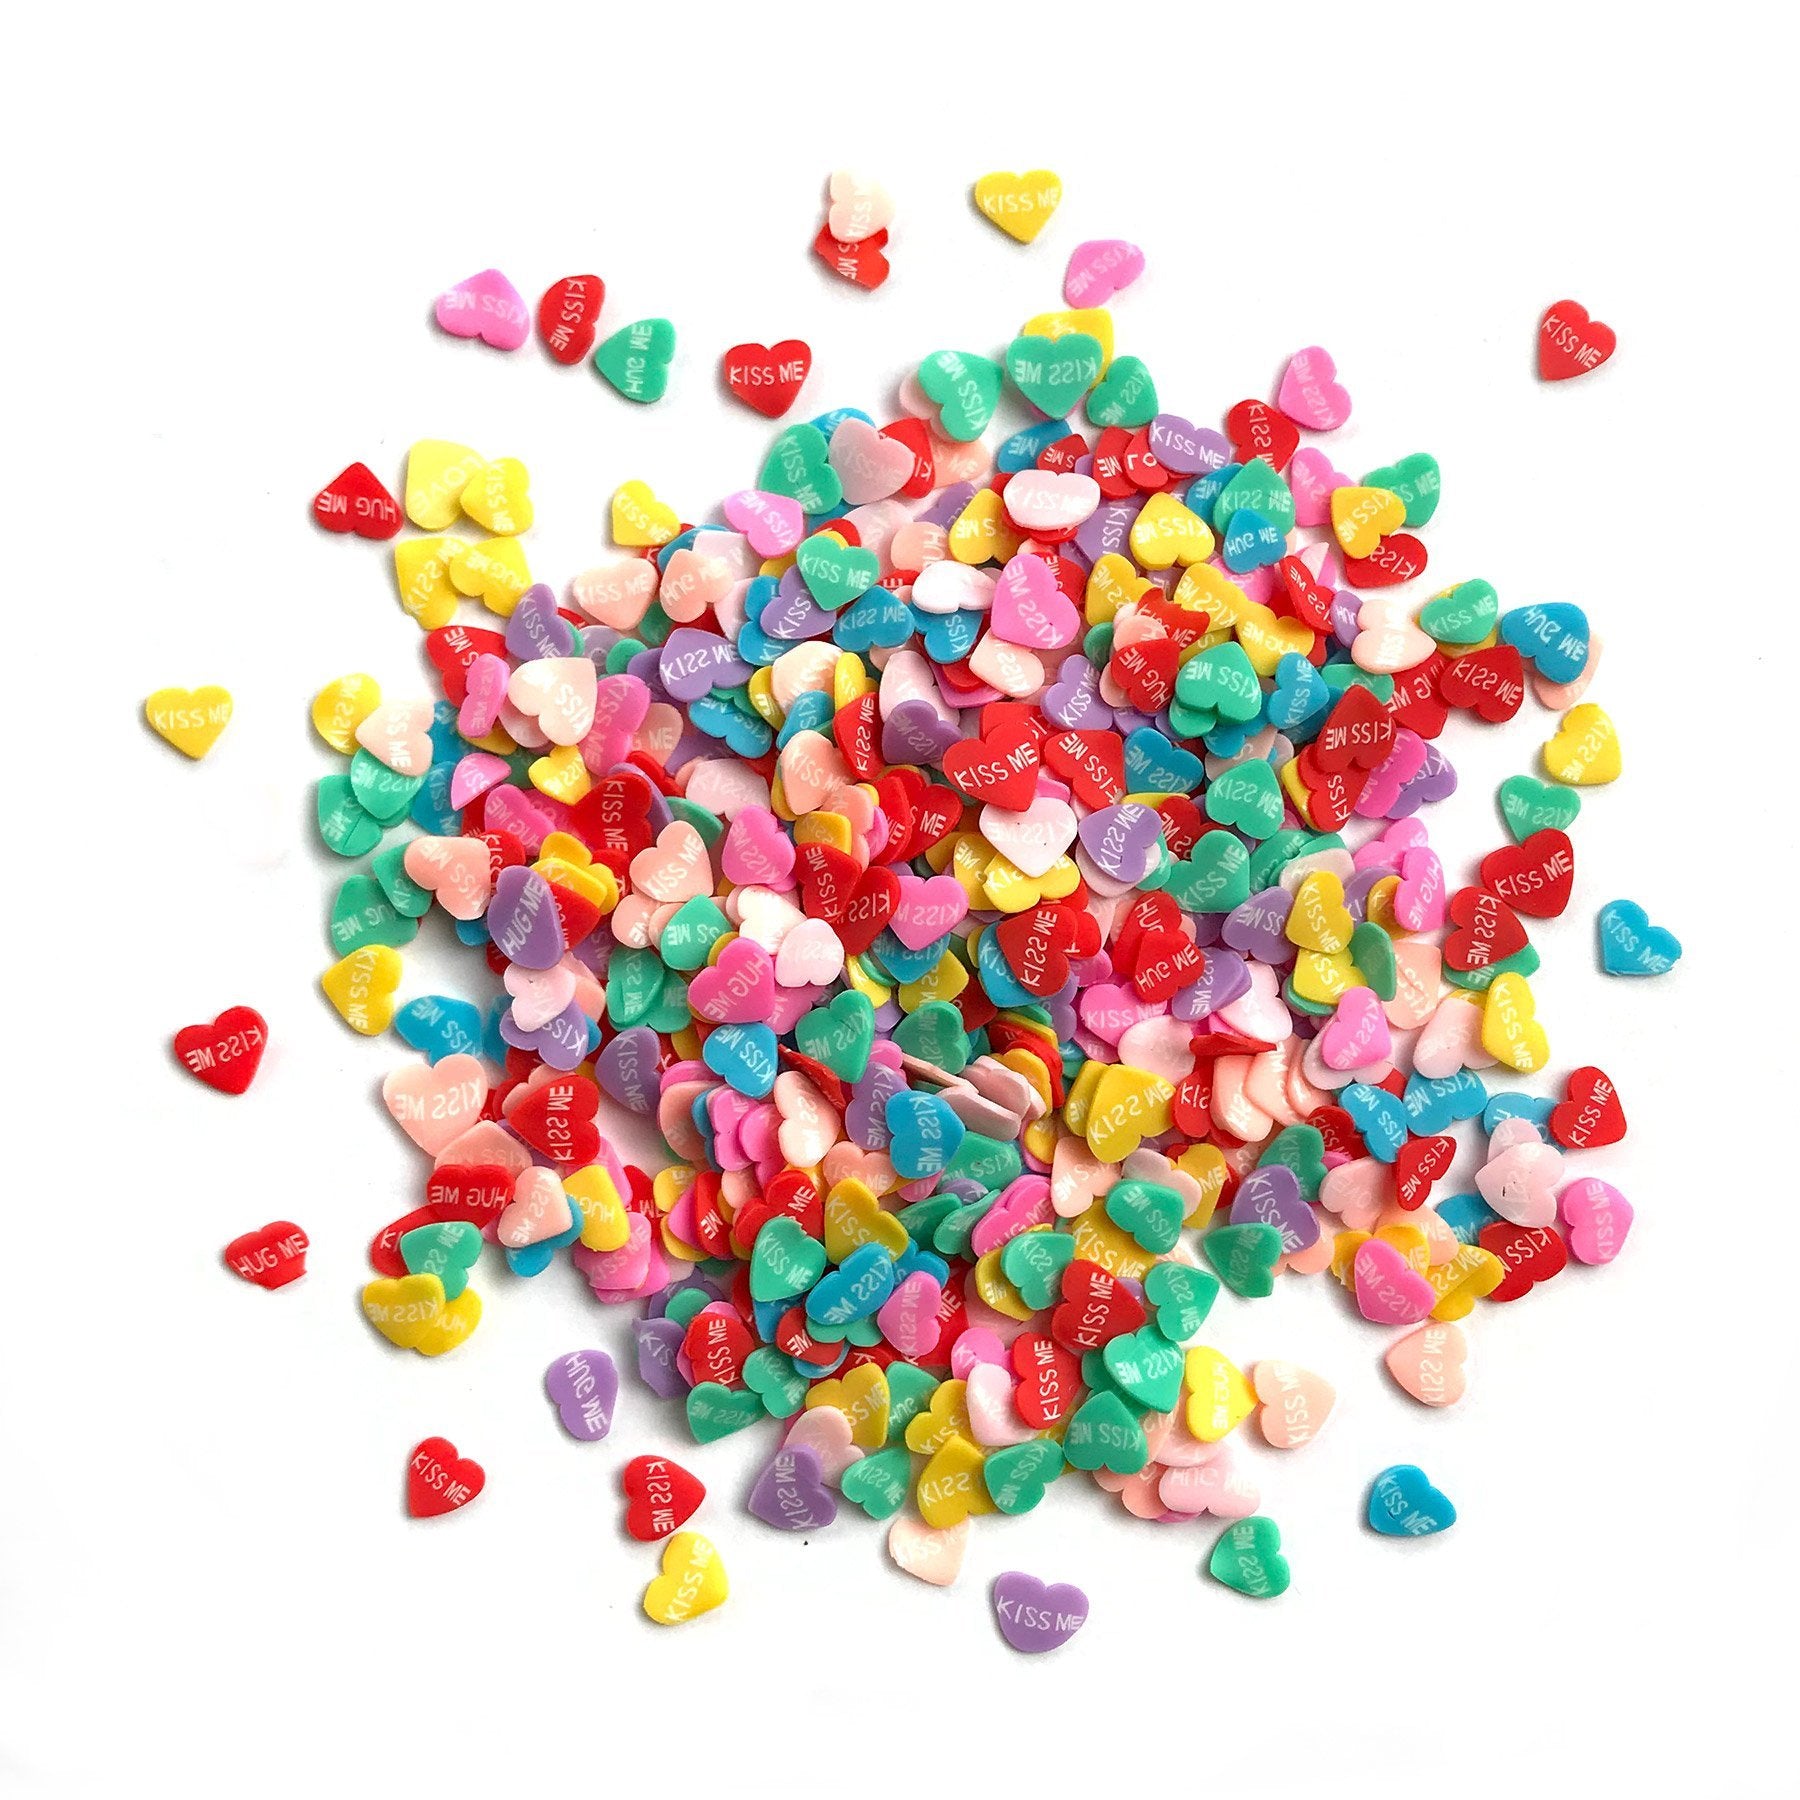 Buttons Galore Sprinkletz, Tiny Polymer Clay Embellishments for Crafts,  Scrapbooks, Card Making & Shaker Crafts - Spring - 2,400 Pieces